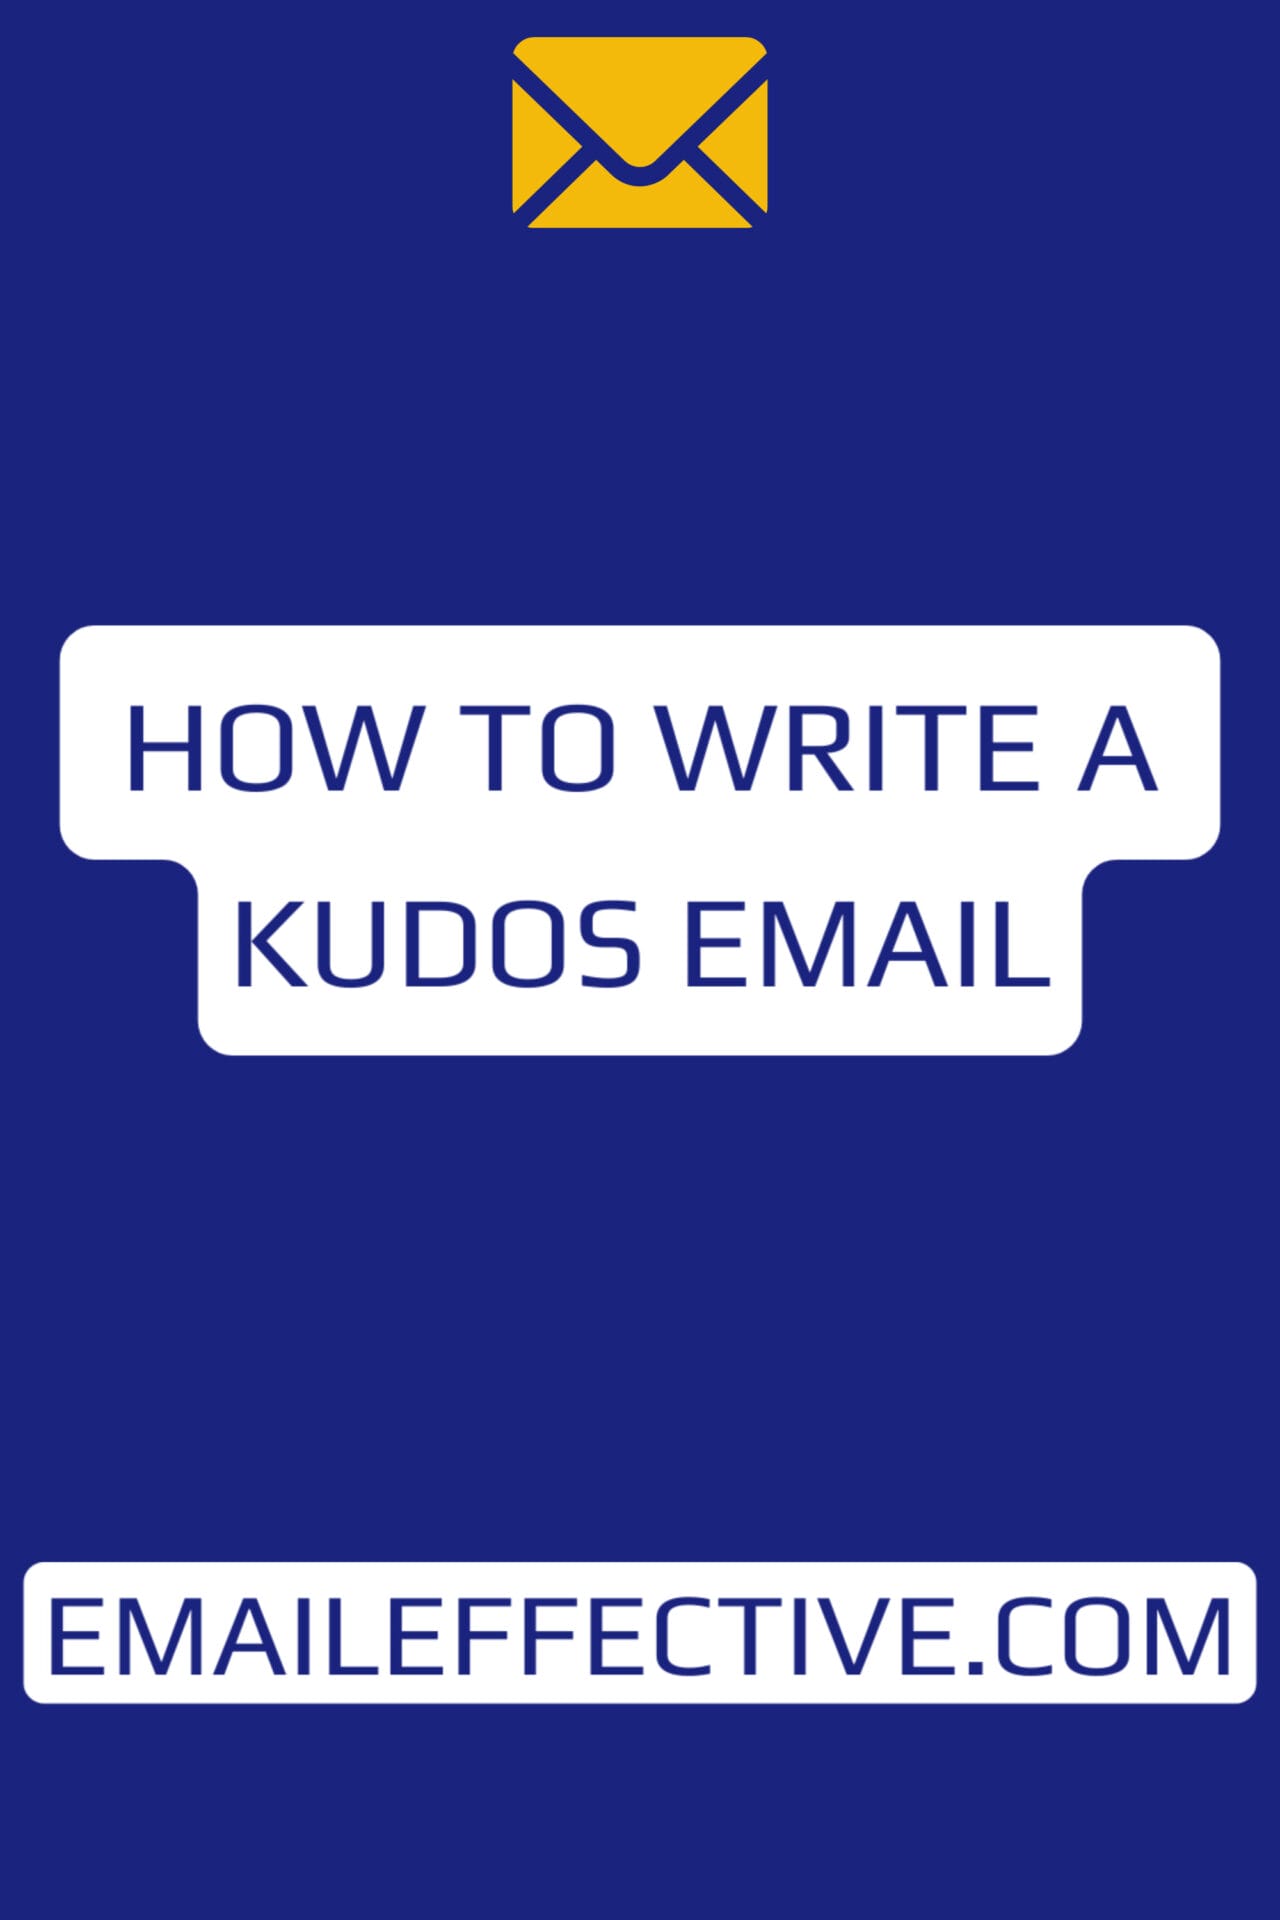 How to Write a Kudos Email